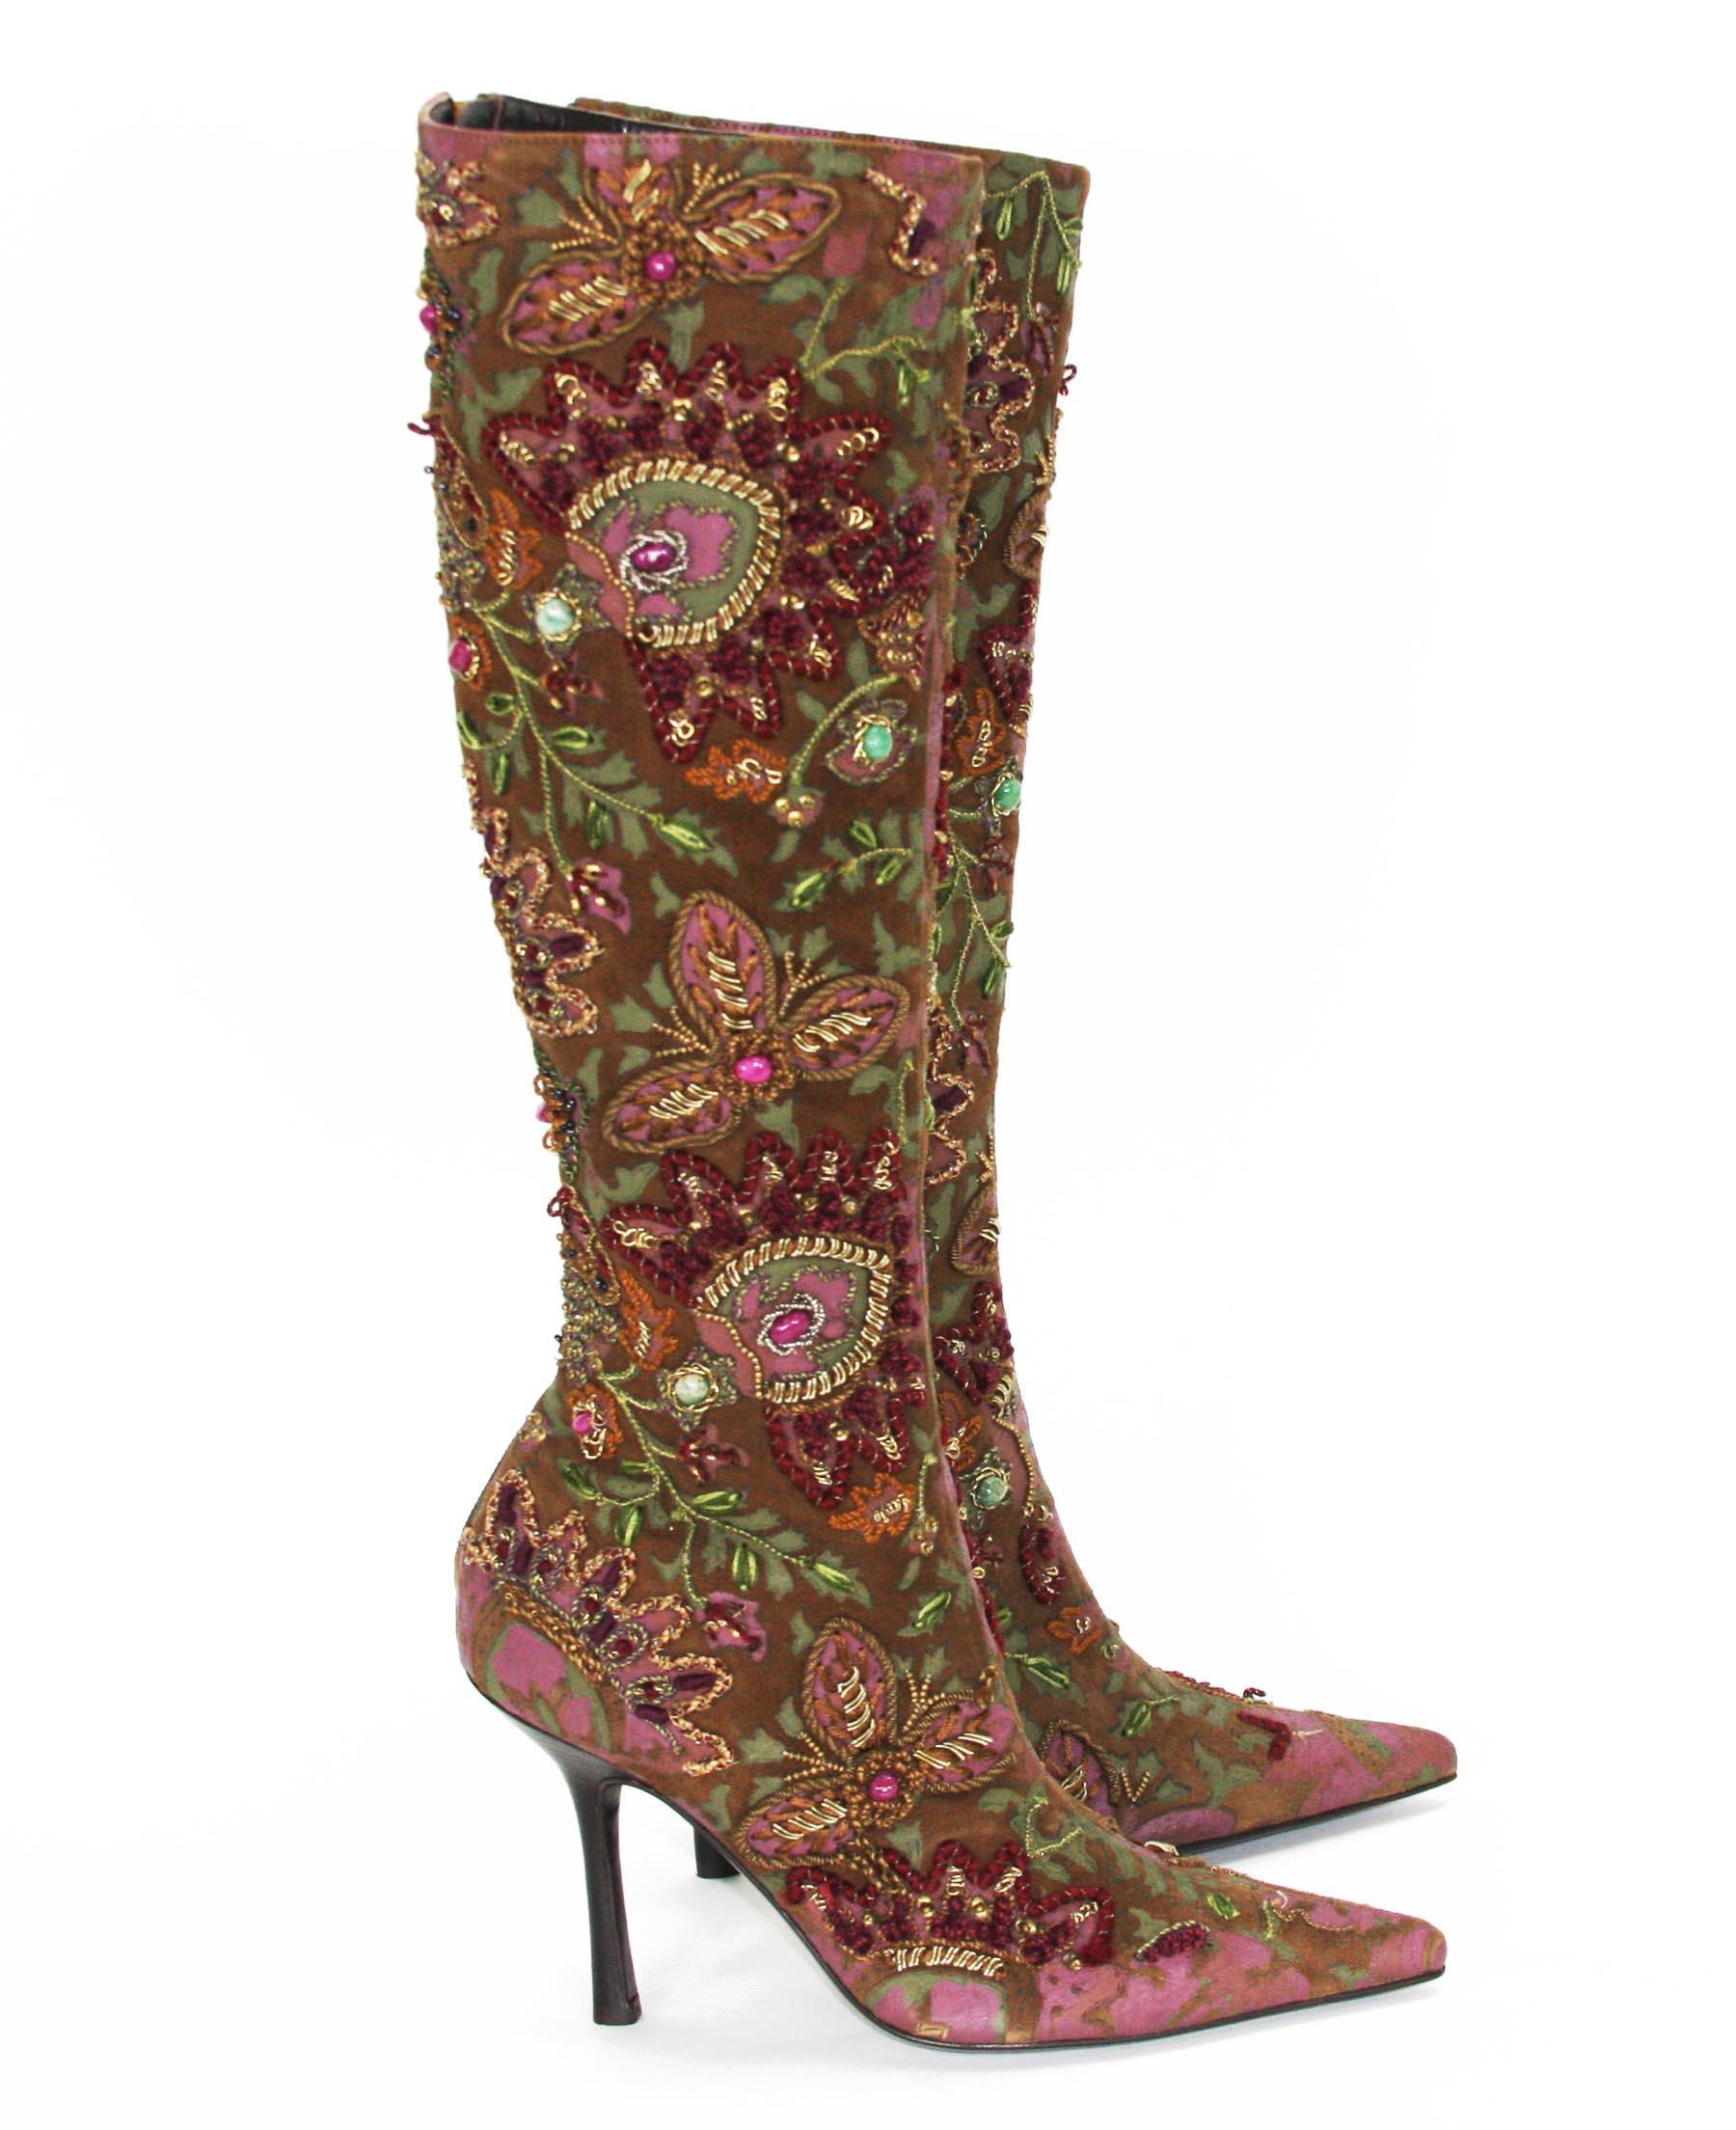 New Oscar De La Renta F/W 2004 Hand Painted Embroidered Boots 36.6 - US 6.5 In New Condition For Sale In Montgomery, TX